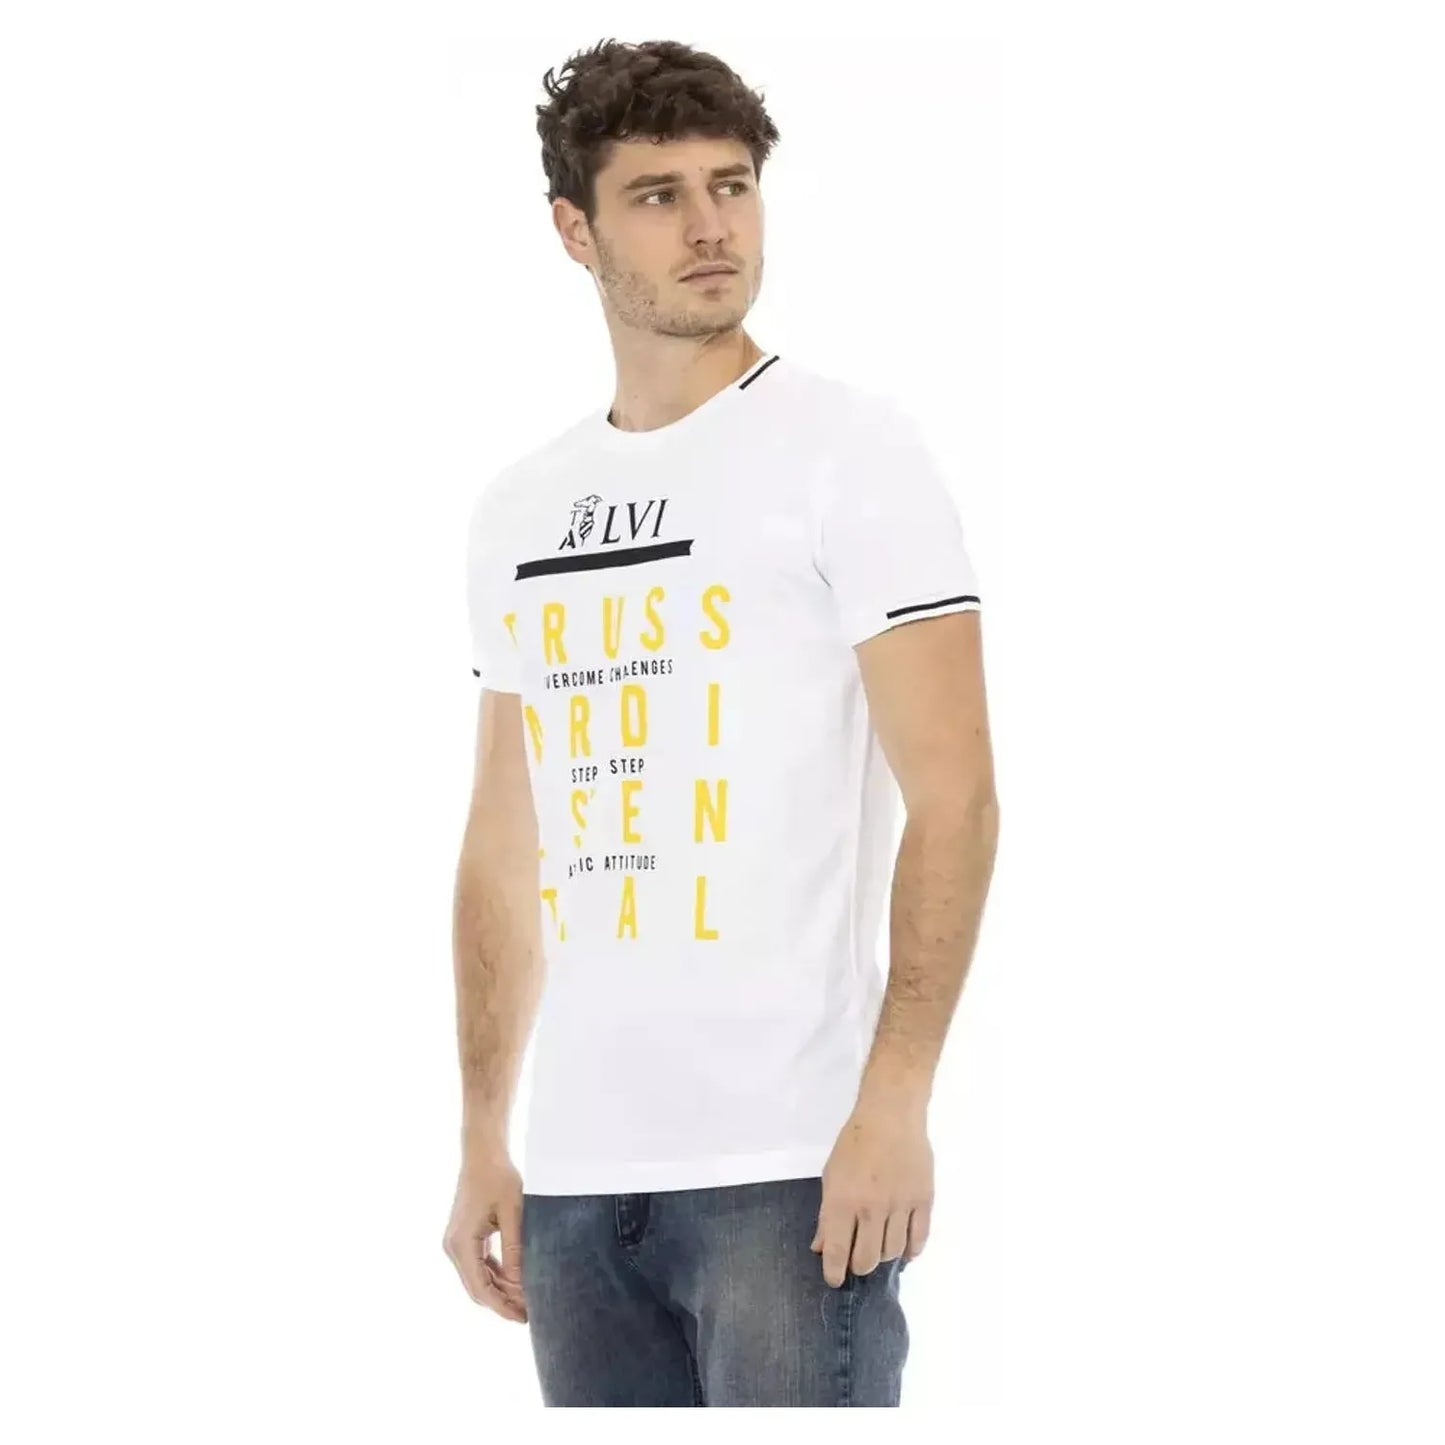 Trussardi Action Elegant White Tee with Artful Front Print white-cotton-t-shirt-29 product-22750-128918516-24-a4bf3cbf-728.webp